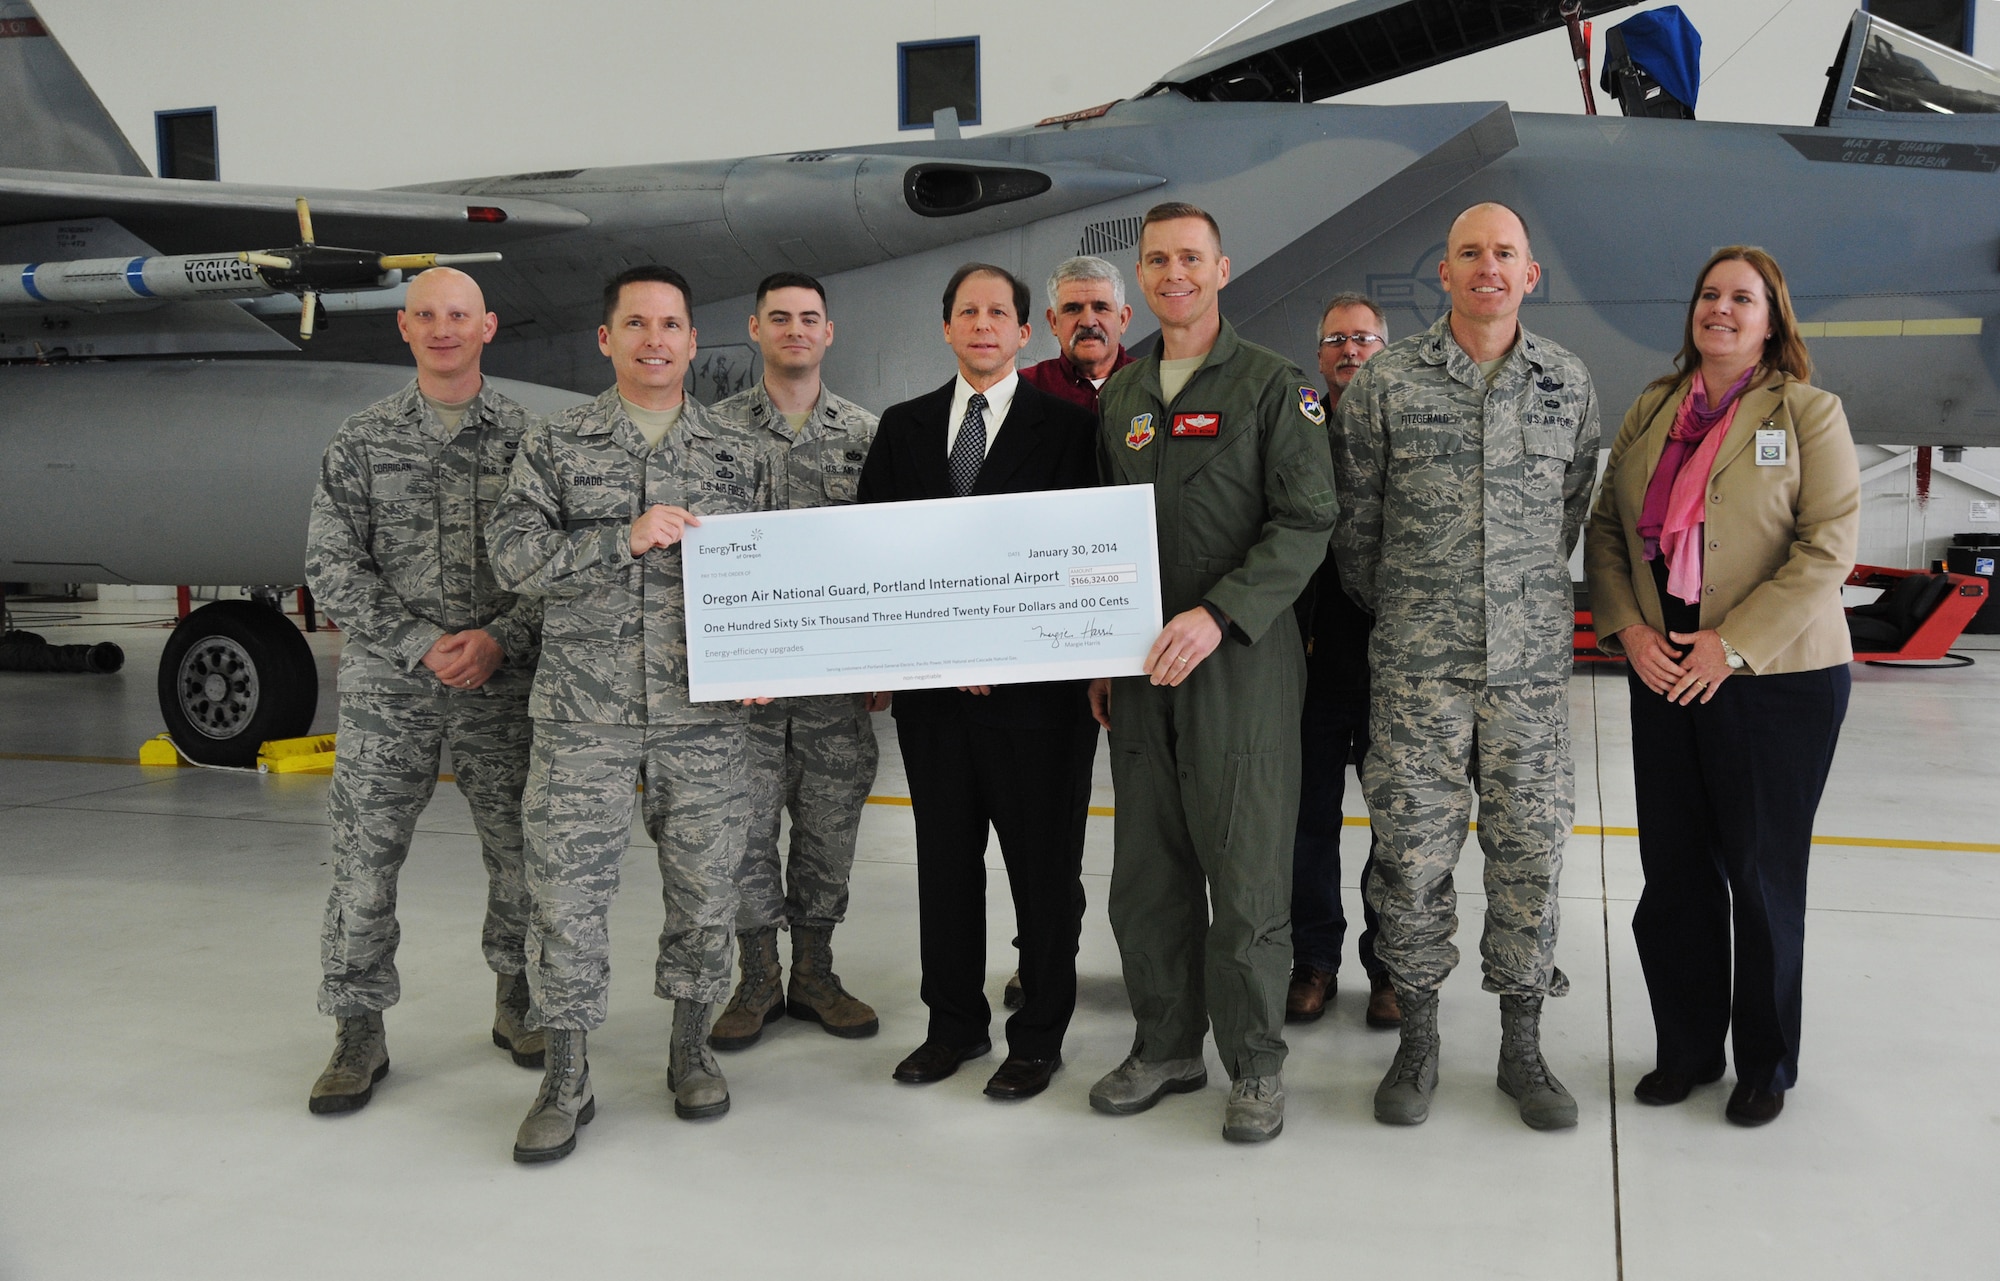 Oregon Air National Guard Chief Master Sgt. Loren Bradd and Col. Rick Wedan, 142nd Fighter Wing Commander, hold a rebate check with Paul West, Director of Energy Programs, and pause for a photograph with other Oregon Air National Guard members, Portland Air National Guard Base staff and other Energy Trust staff during a presentation ceremony held at the Portland Air National Guard Base, Ore., Jan. 30, 2014. (Air National Guard photo by Tech. Sgt. John Hughel, 142nd Fighter Wing Public Affairs/Released)